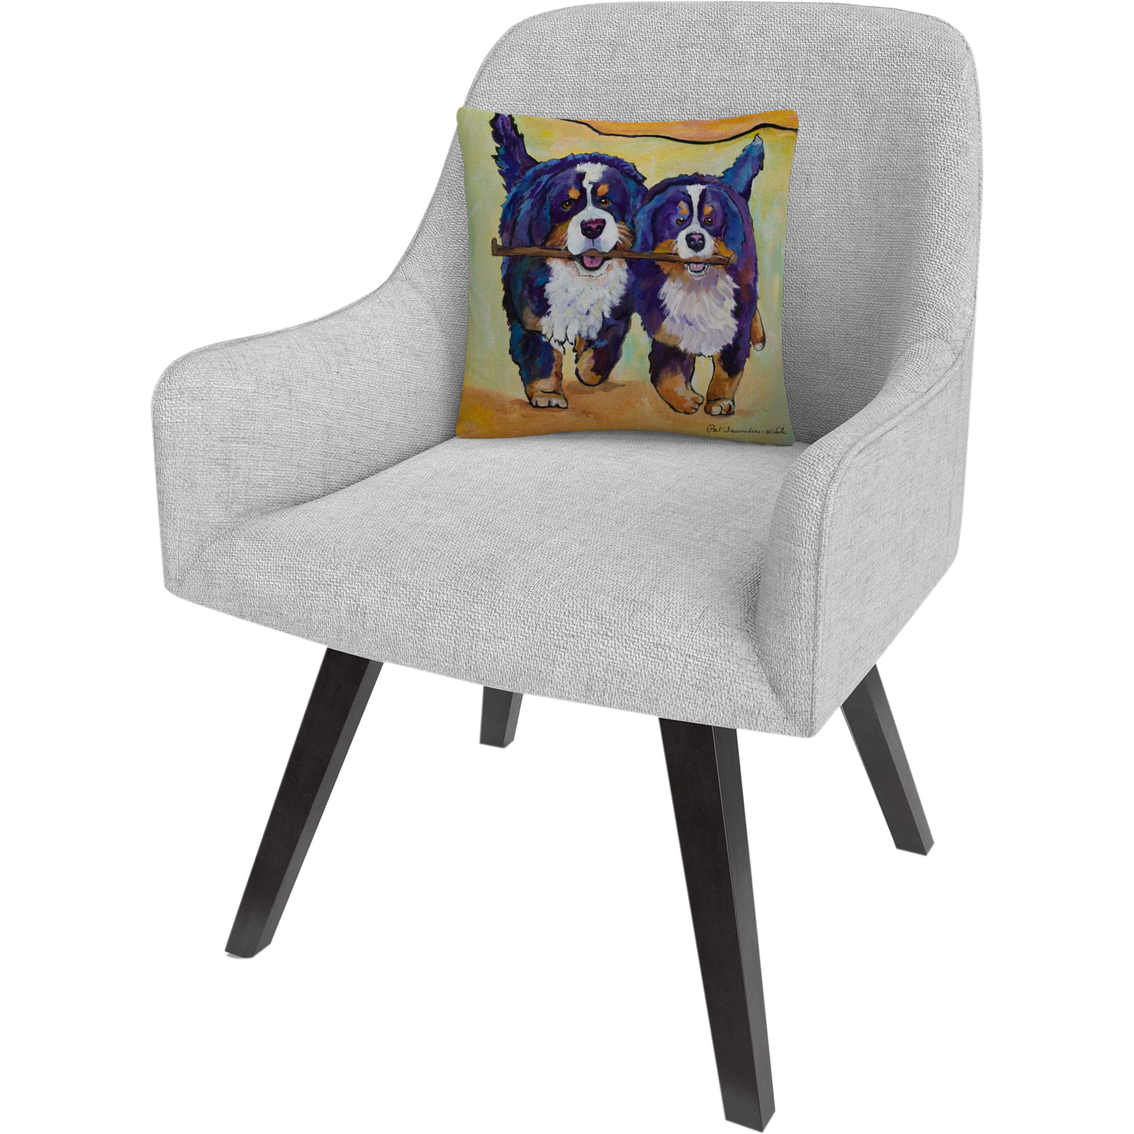 Trademark Fine Art Stick Together Bold Pets Animals Decorative Throw Pillow - Image 2 of 2